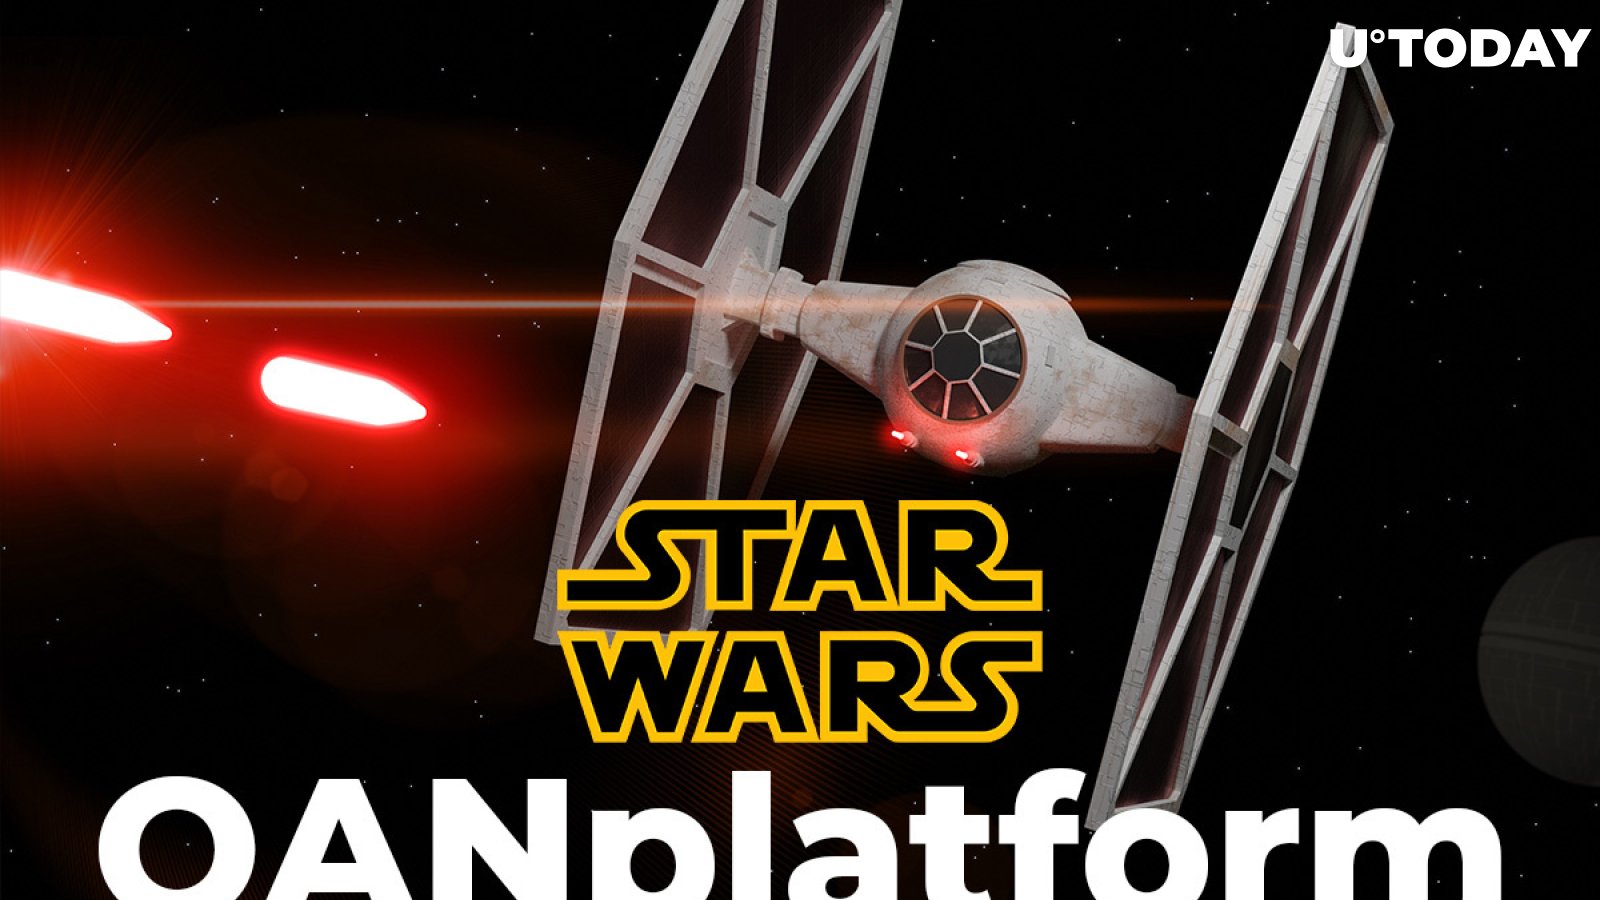 Star Wars NFTs to Be Released by QANplatform on May 4th